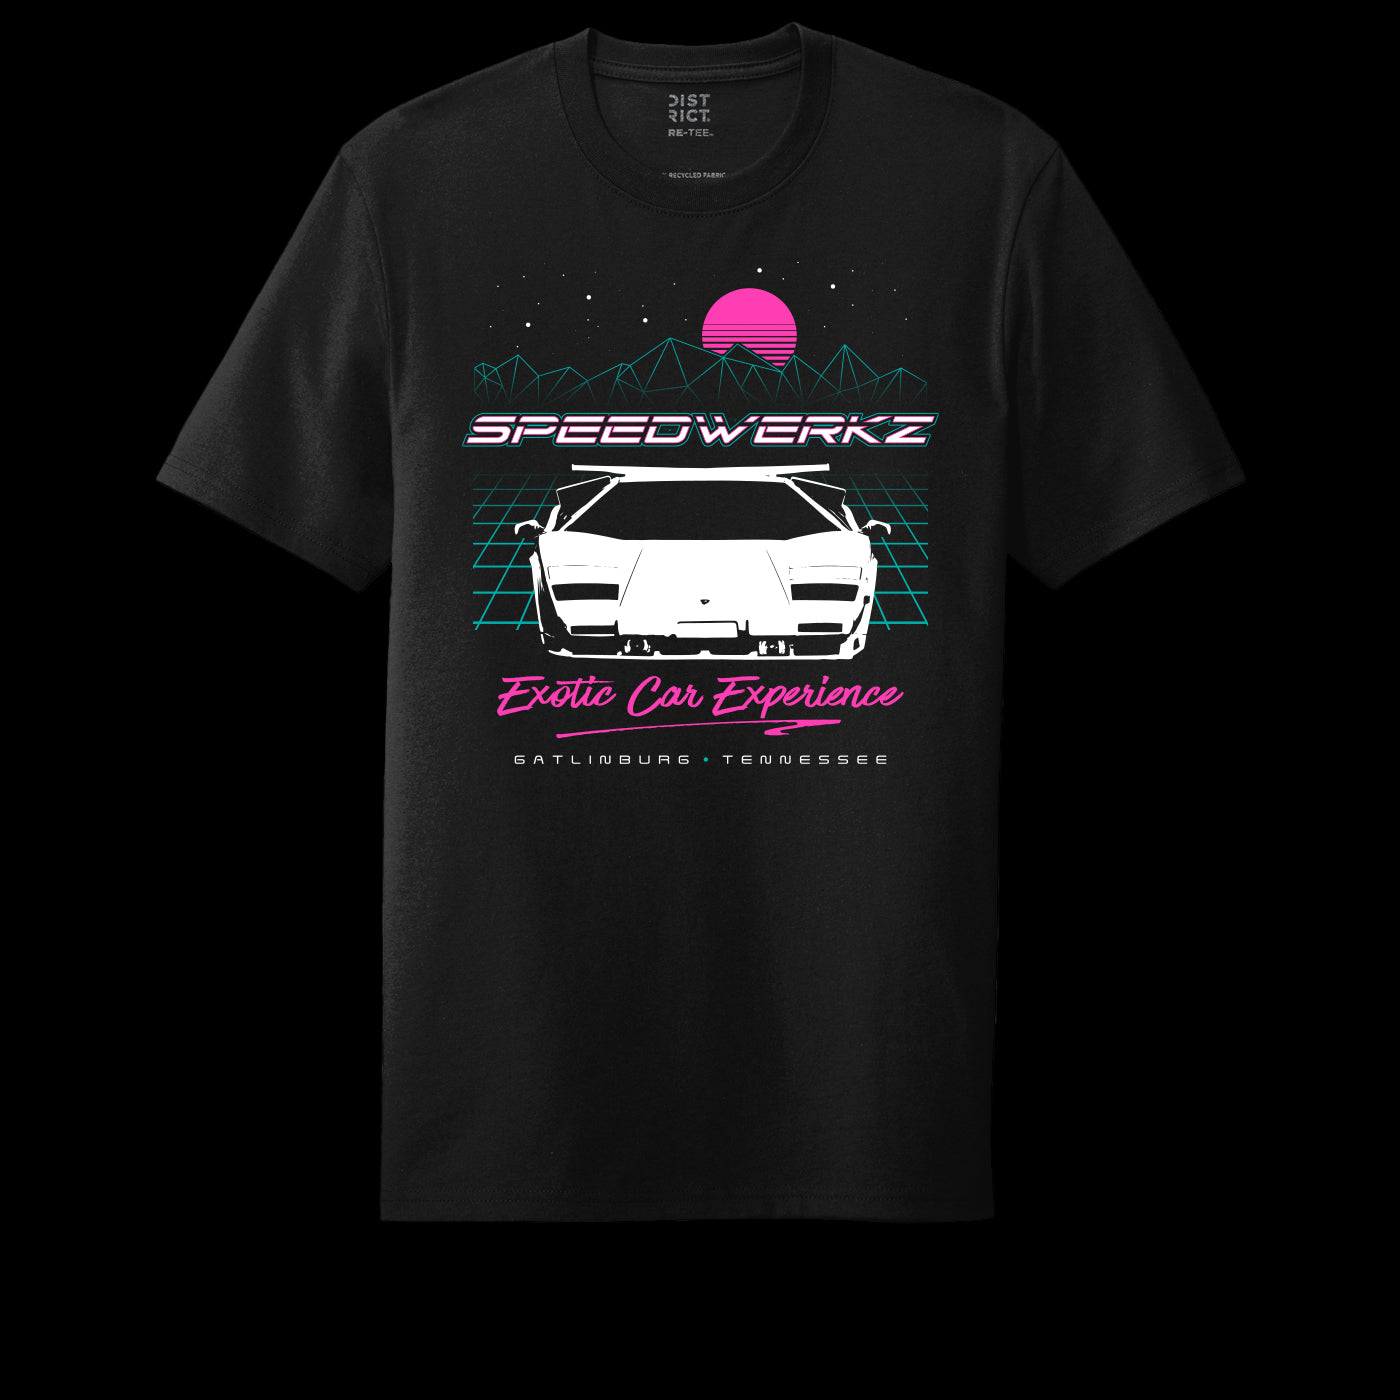 80s throwback Speedwerkz T-Shirt with pink writing and a white car 